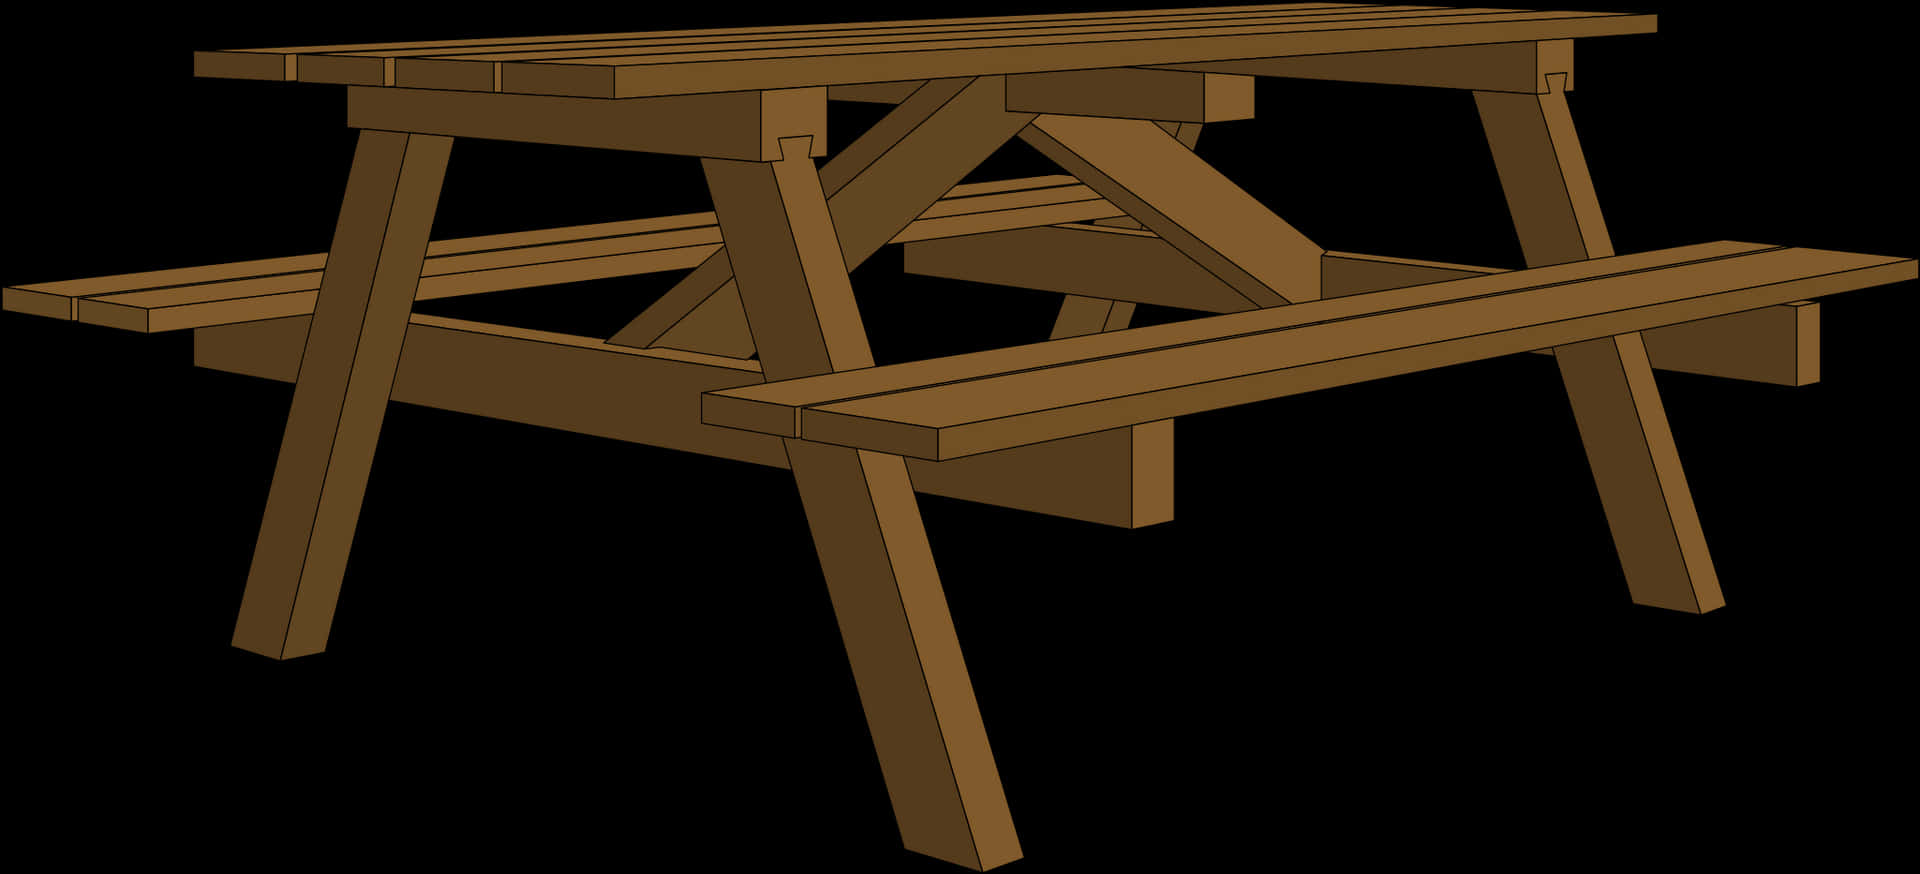 Wooden Picnic Table Vector Illustration PNG image